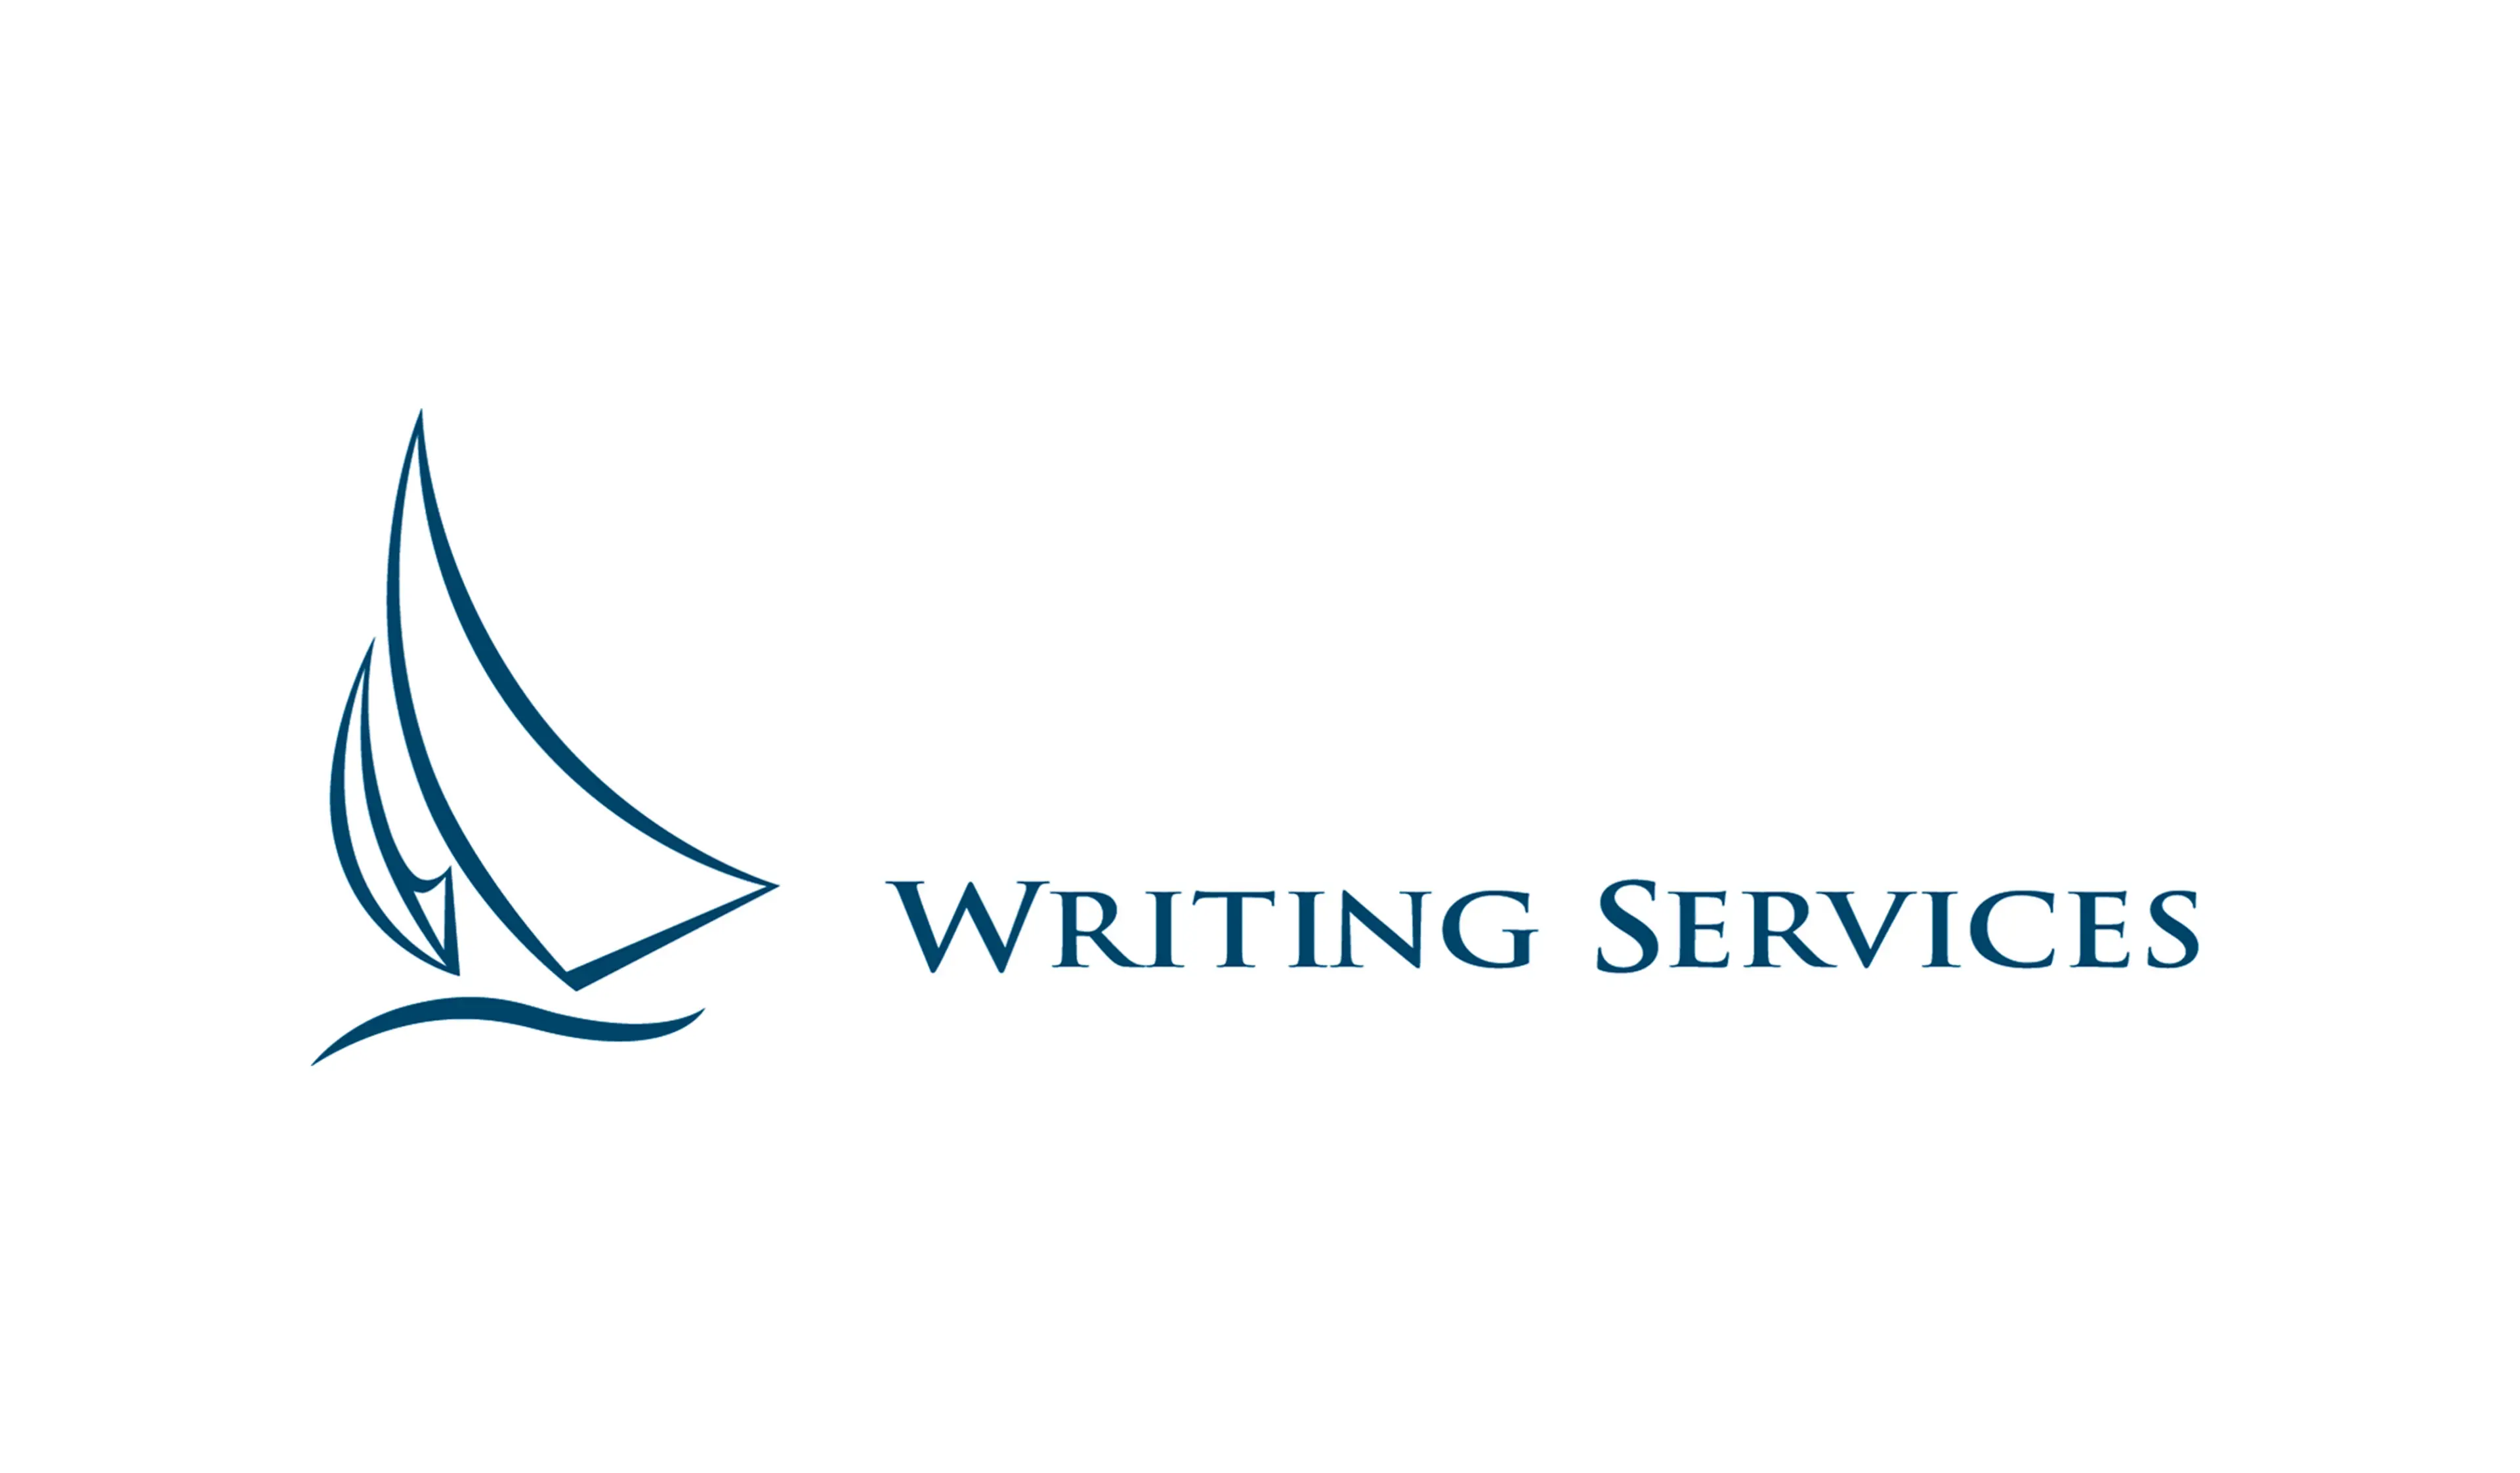 Station8 co-founder Laura Crouch starts Writing Services, Inc.